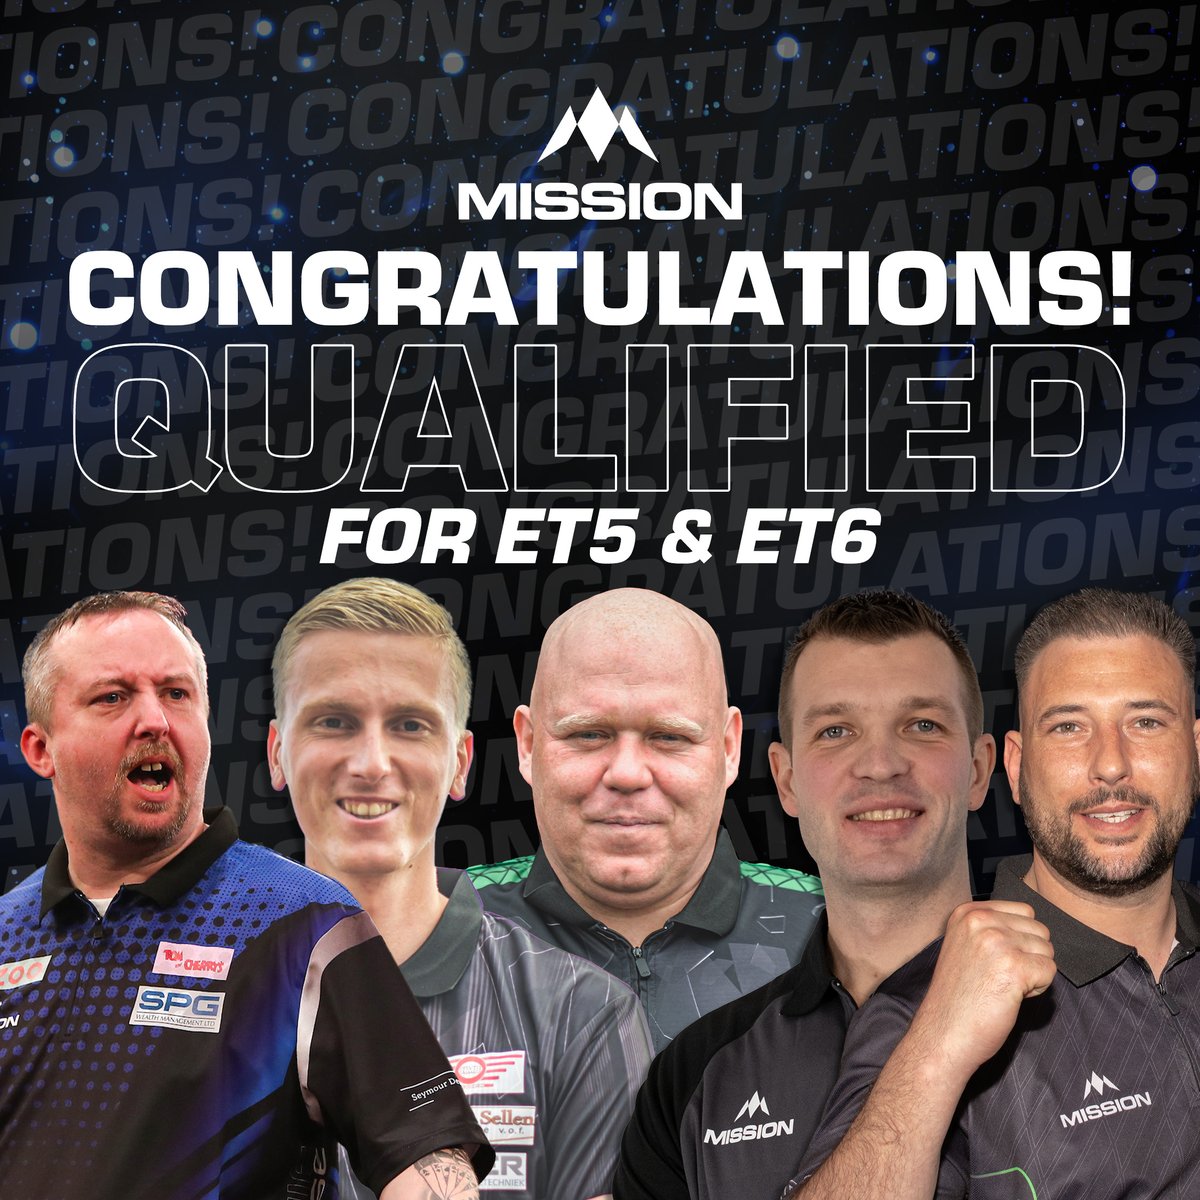 🇦🇹🇩🇪🇪🇺 Congratulations to @madarsrazma @RitchieEdhouse & @WesselNijman180 for securing a European Tour qualification double in Leicester yesterday! The trio will be in ET5 (Graz) & ET6 (Kiel), whilst @SmashLukeman180 and Graham Hall also qualified for ET5! #ForTheWin